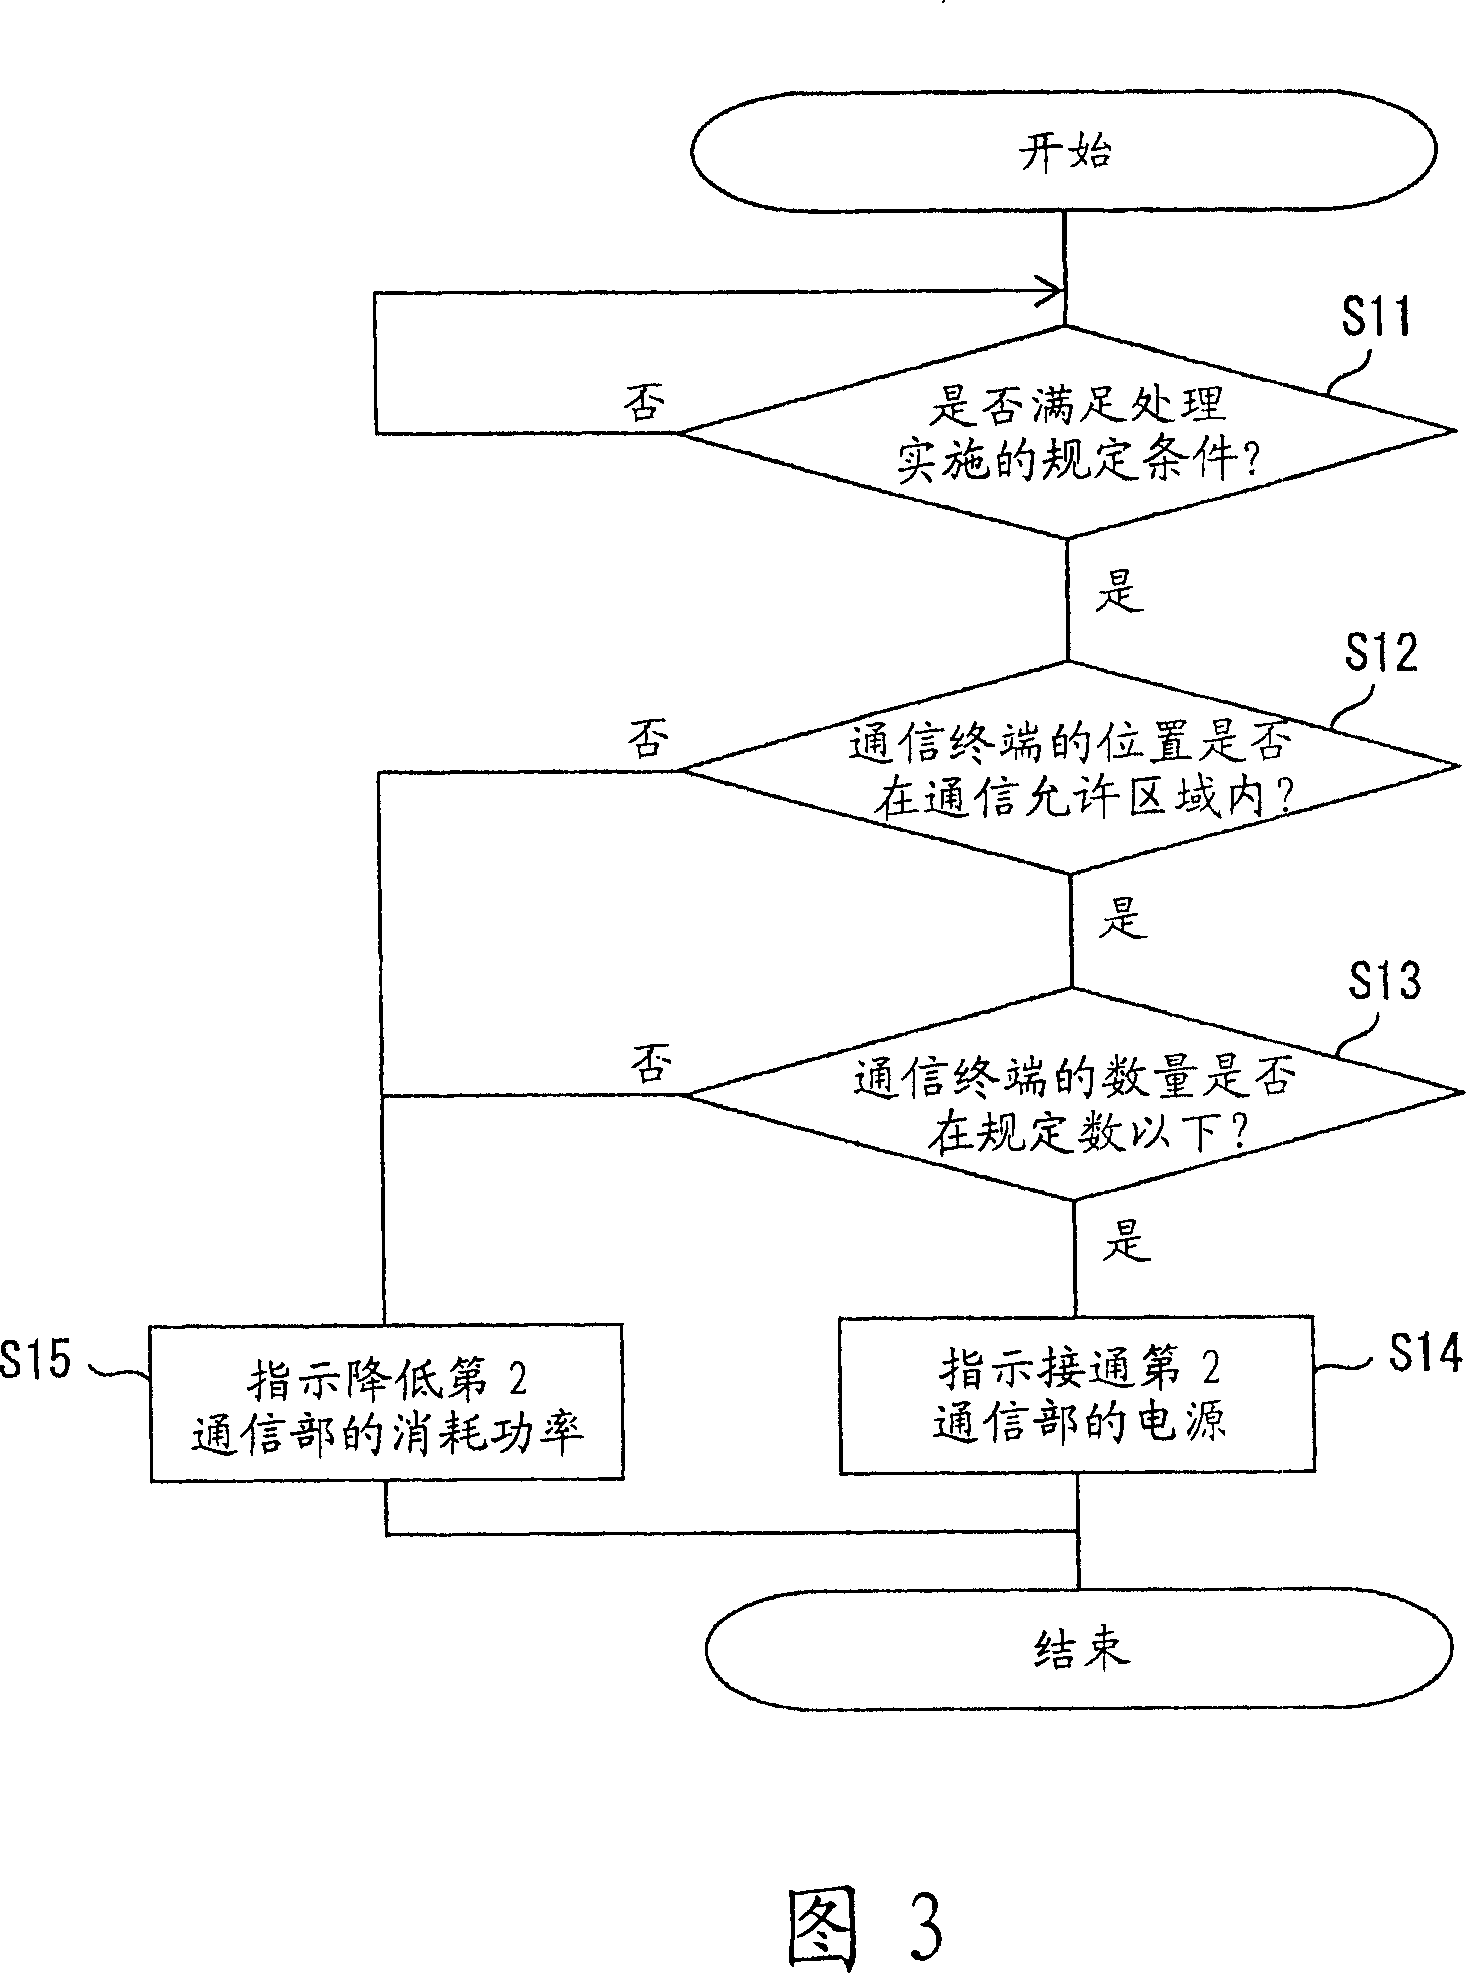 Remote control device, communication network system and remote control method